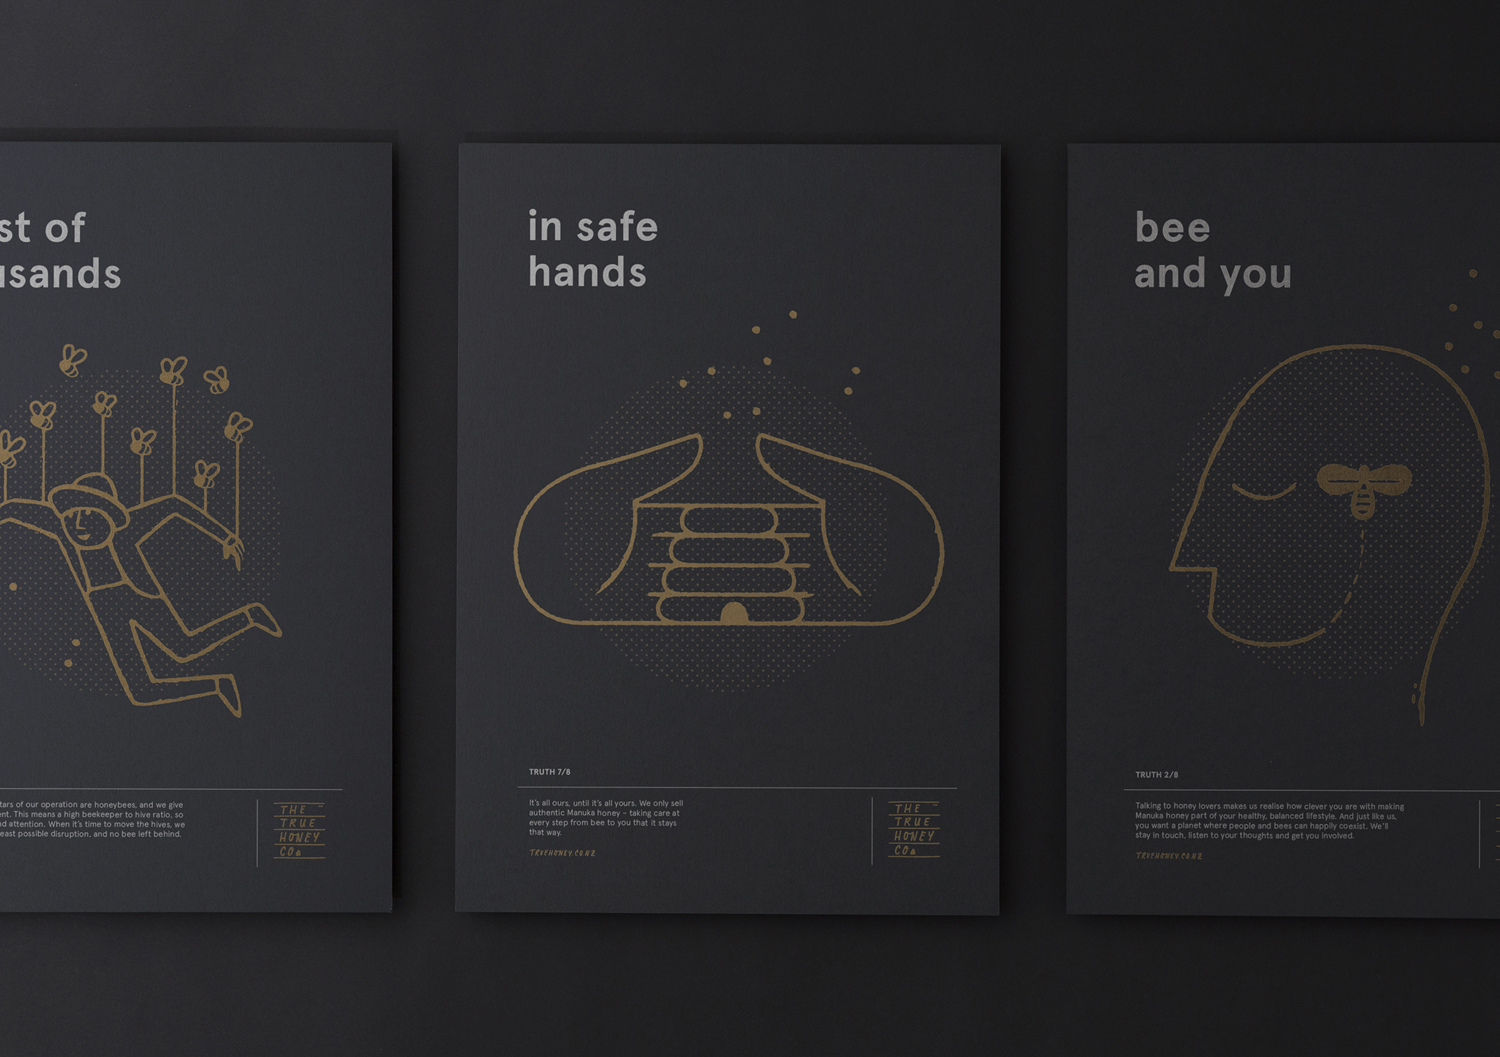 Brand identity and print with black card and gold ink illustrated detail by Marx Design for The True Honey Company, a New Zealand-based business specialising in mānuka honey